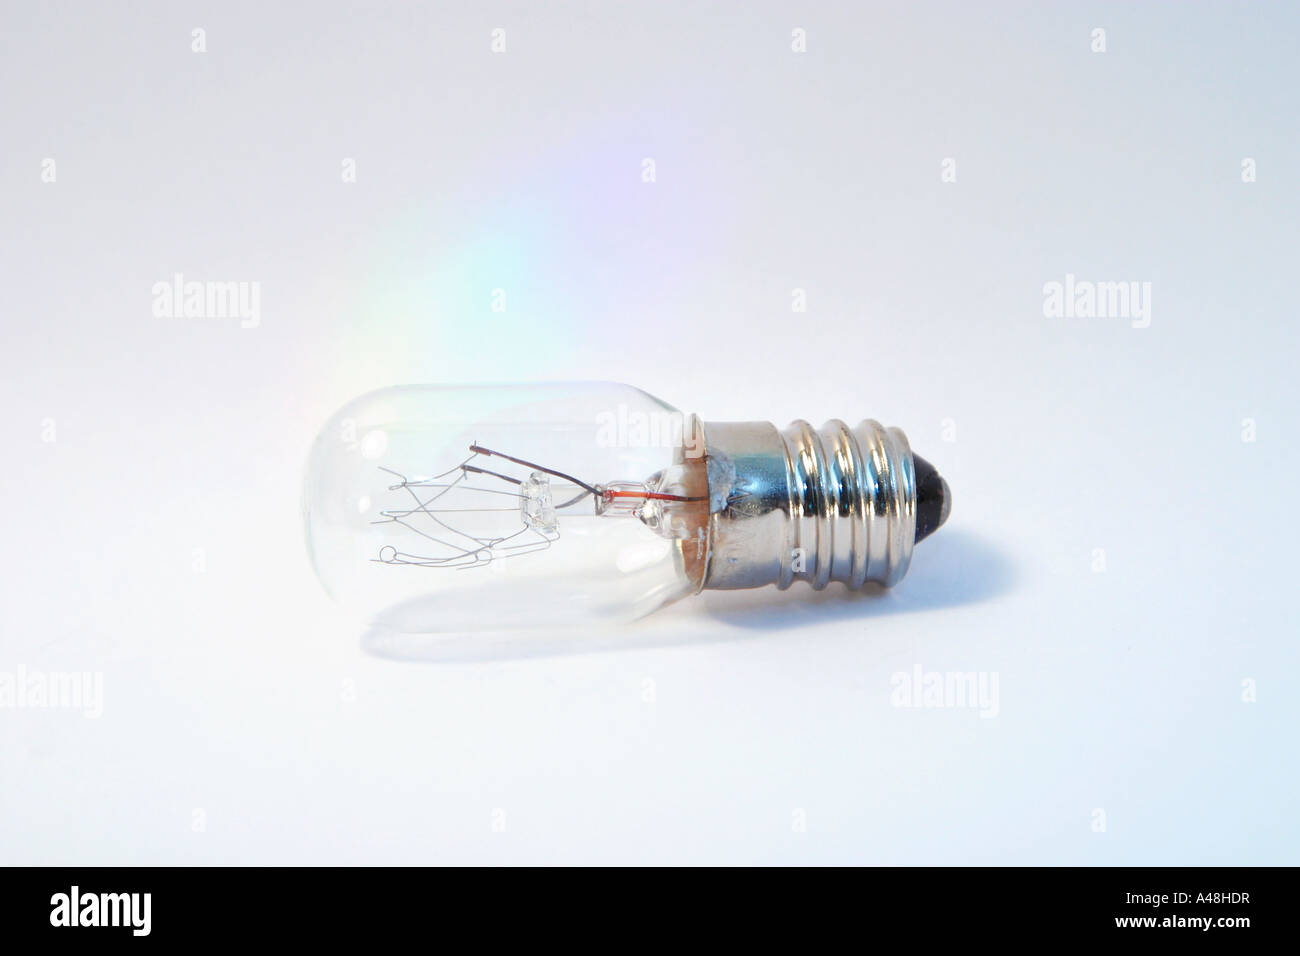 Small screw in light bulb on its side against a plain white background Stock Photo